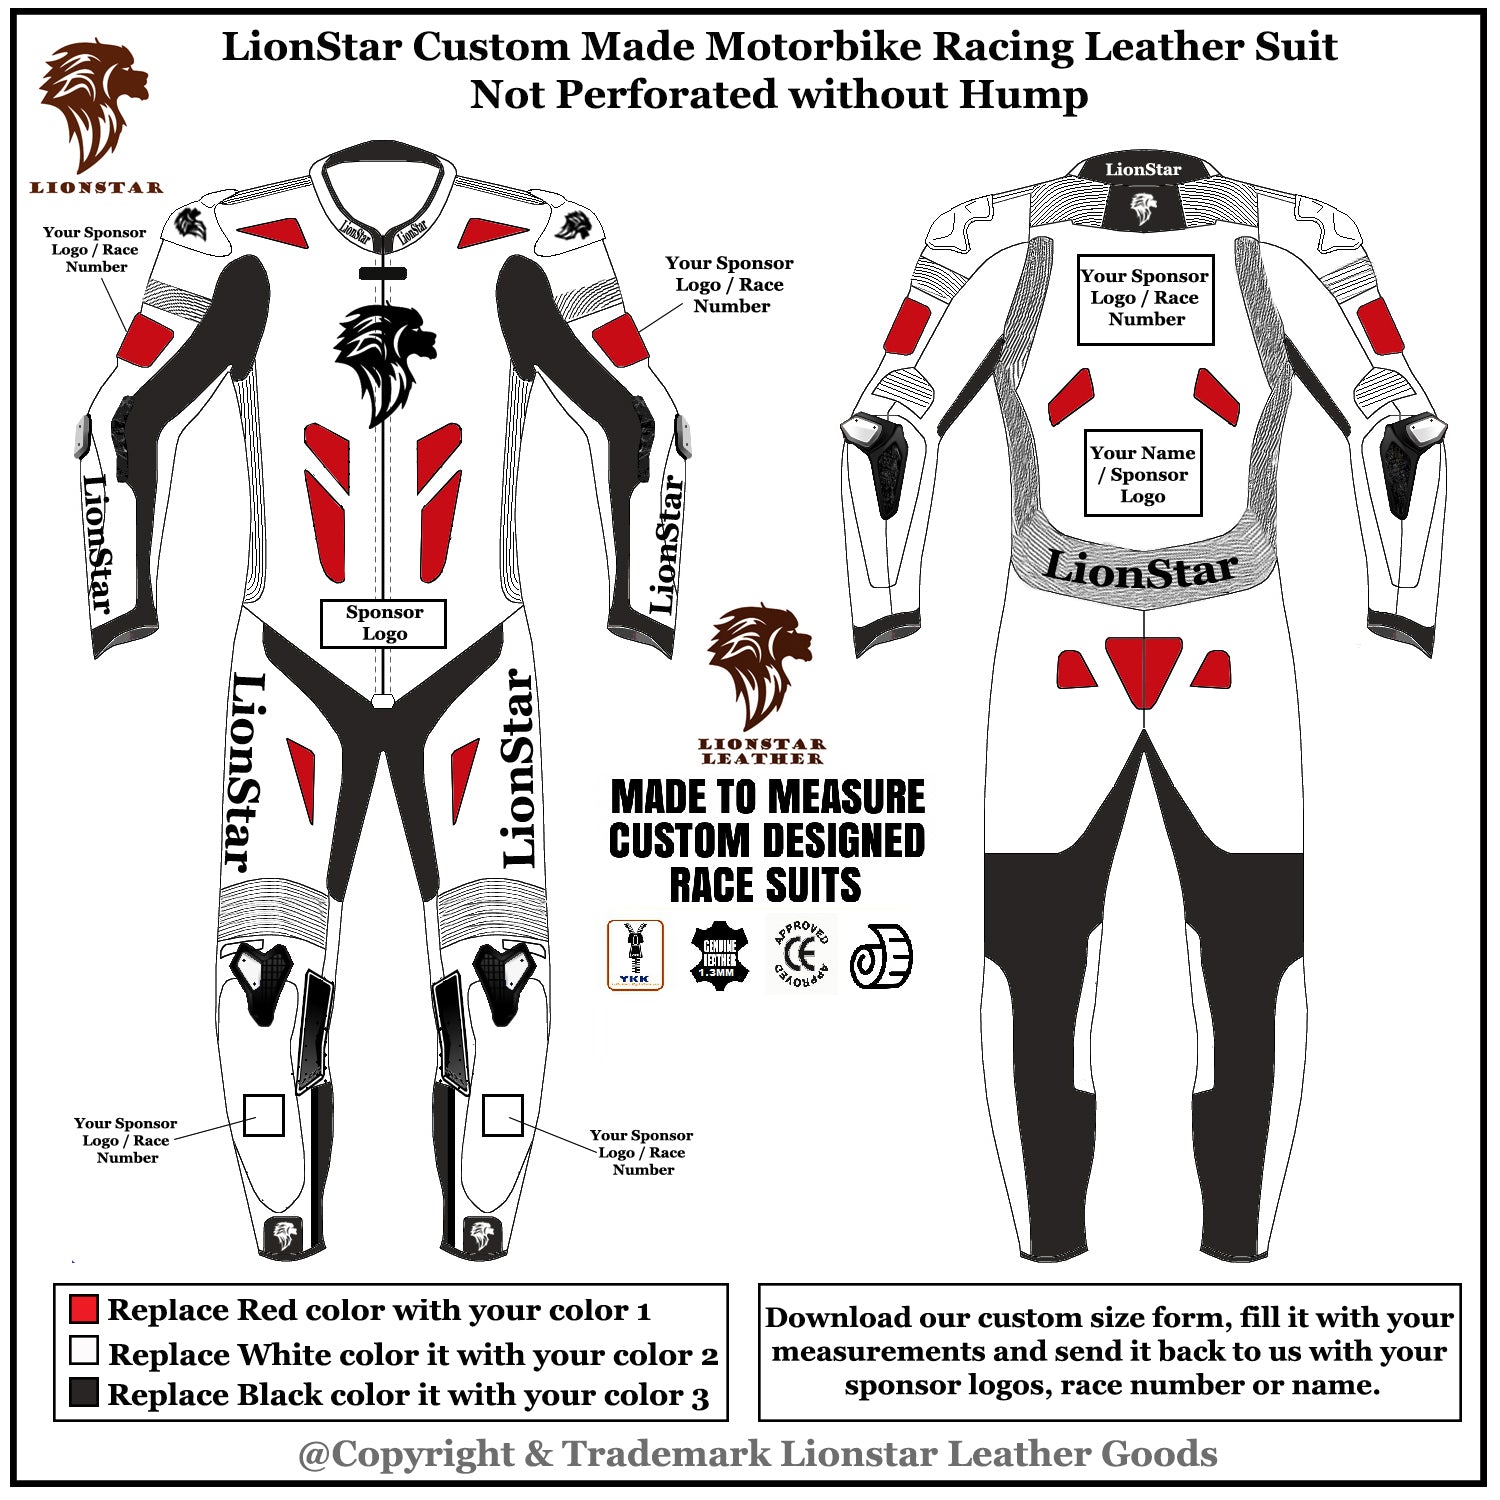 Custom Racing Suit without hump not perforated